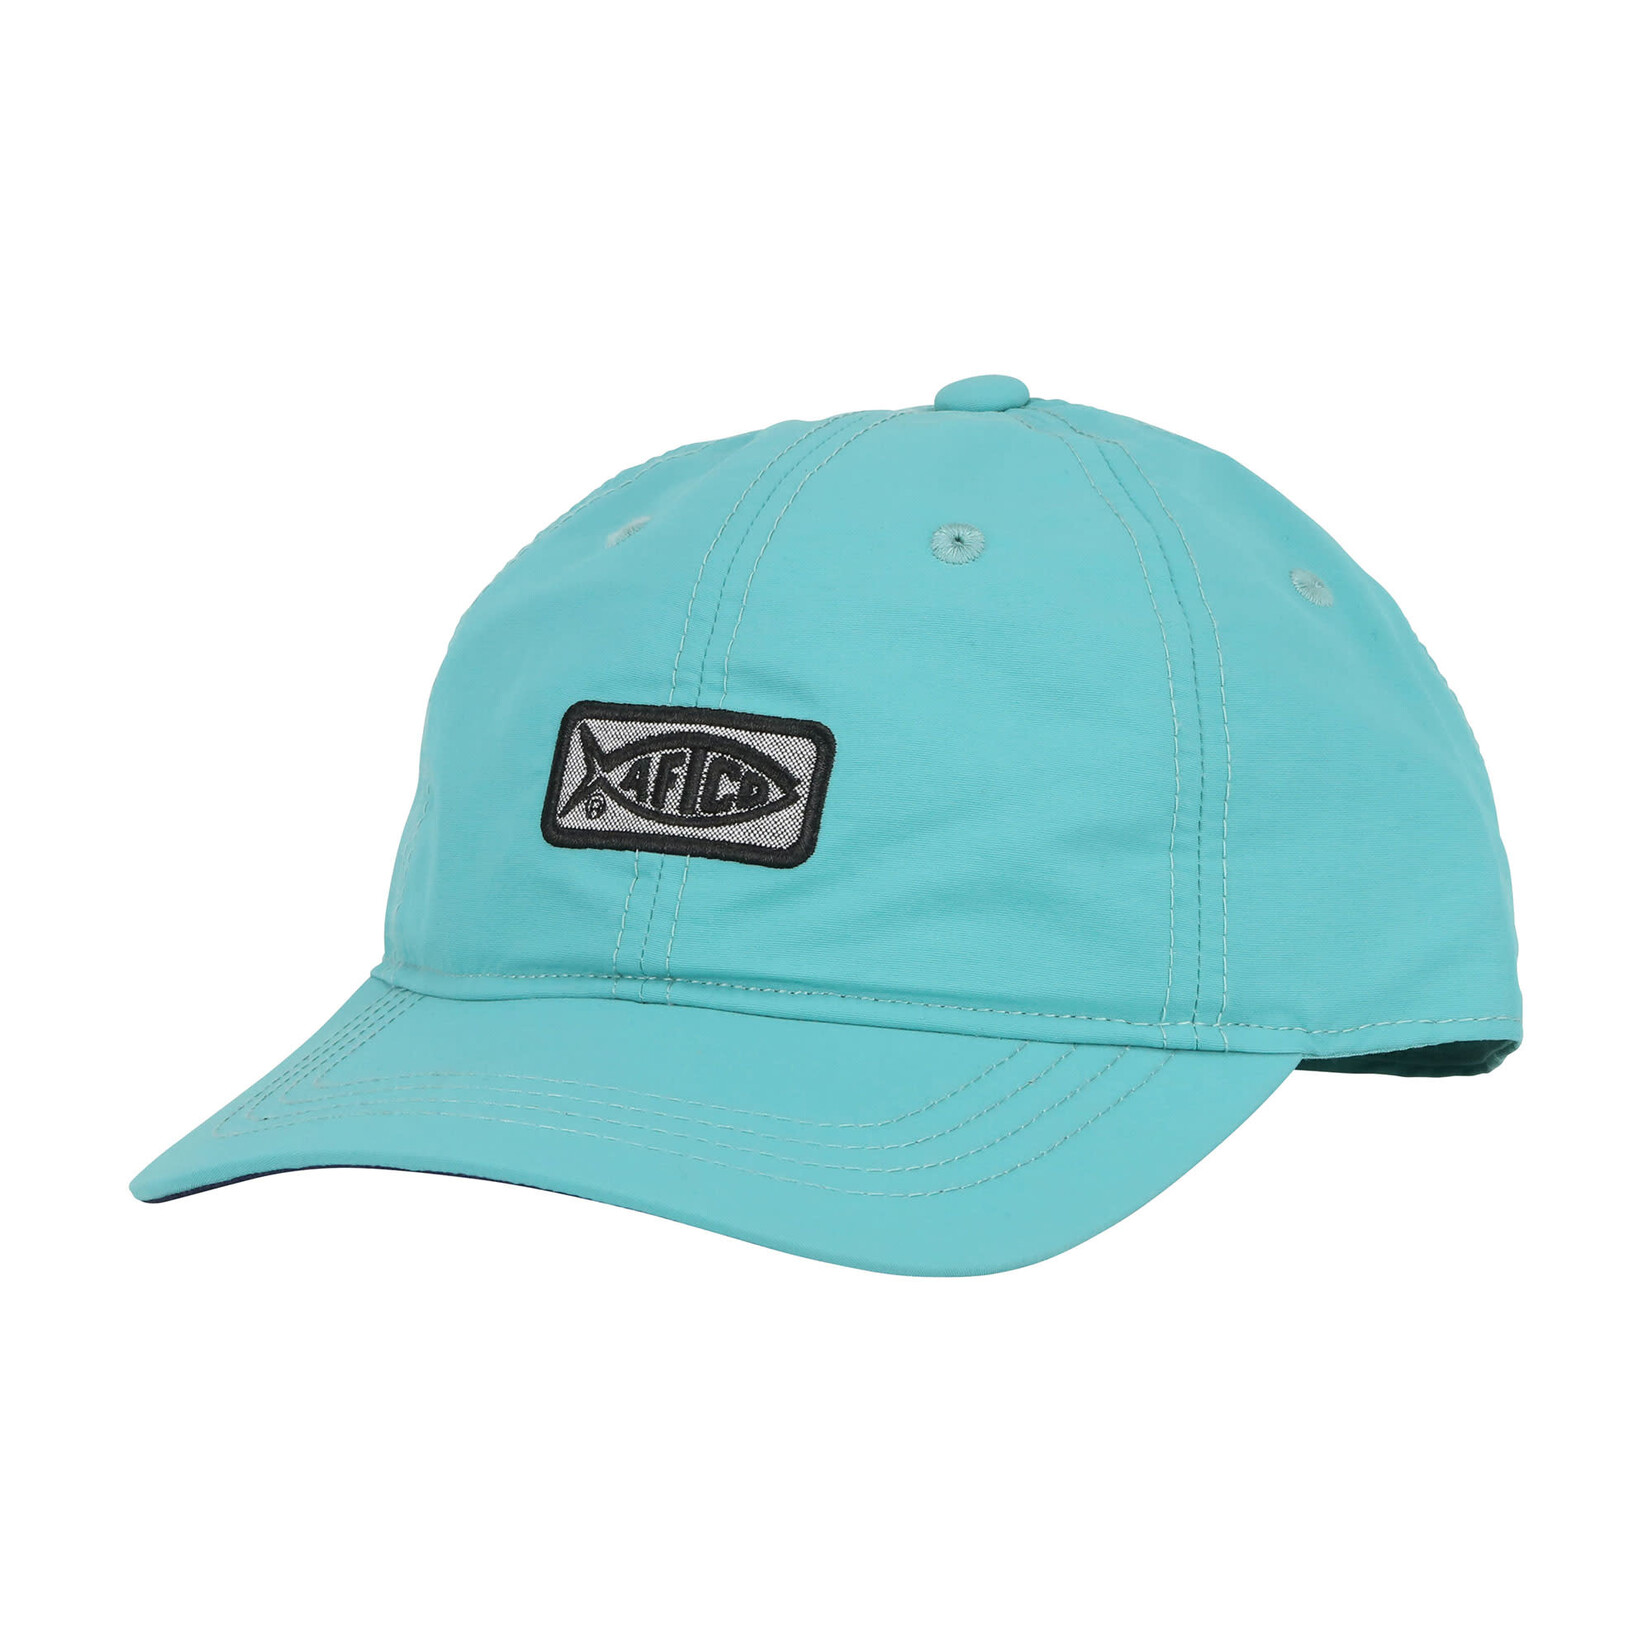 Aftco Aftco Youth Original Fishing Hat